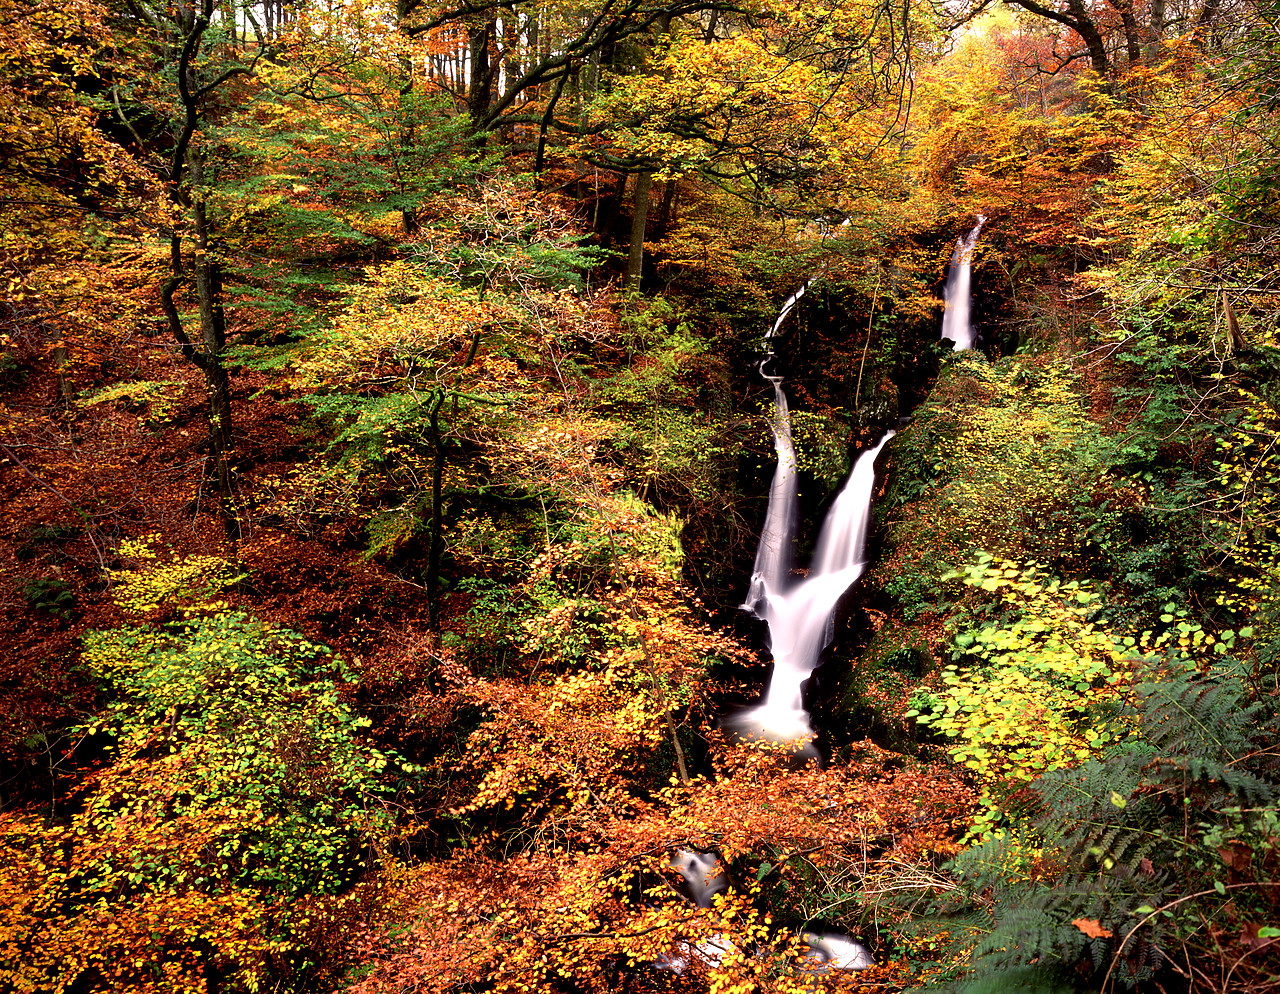 #990705-1 - Stockghyll Force, Ambleside, Lake District, Cumbria, England